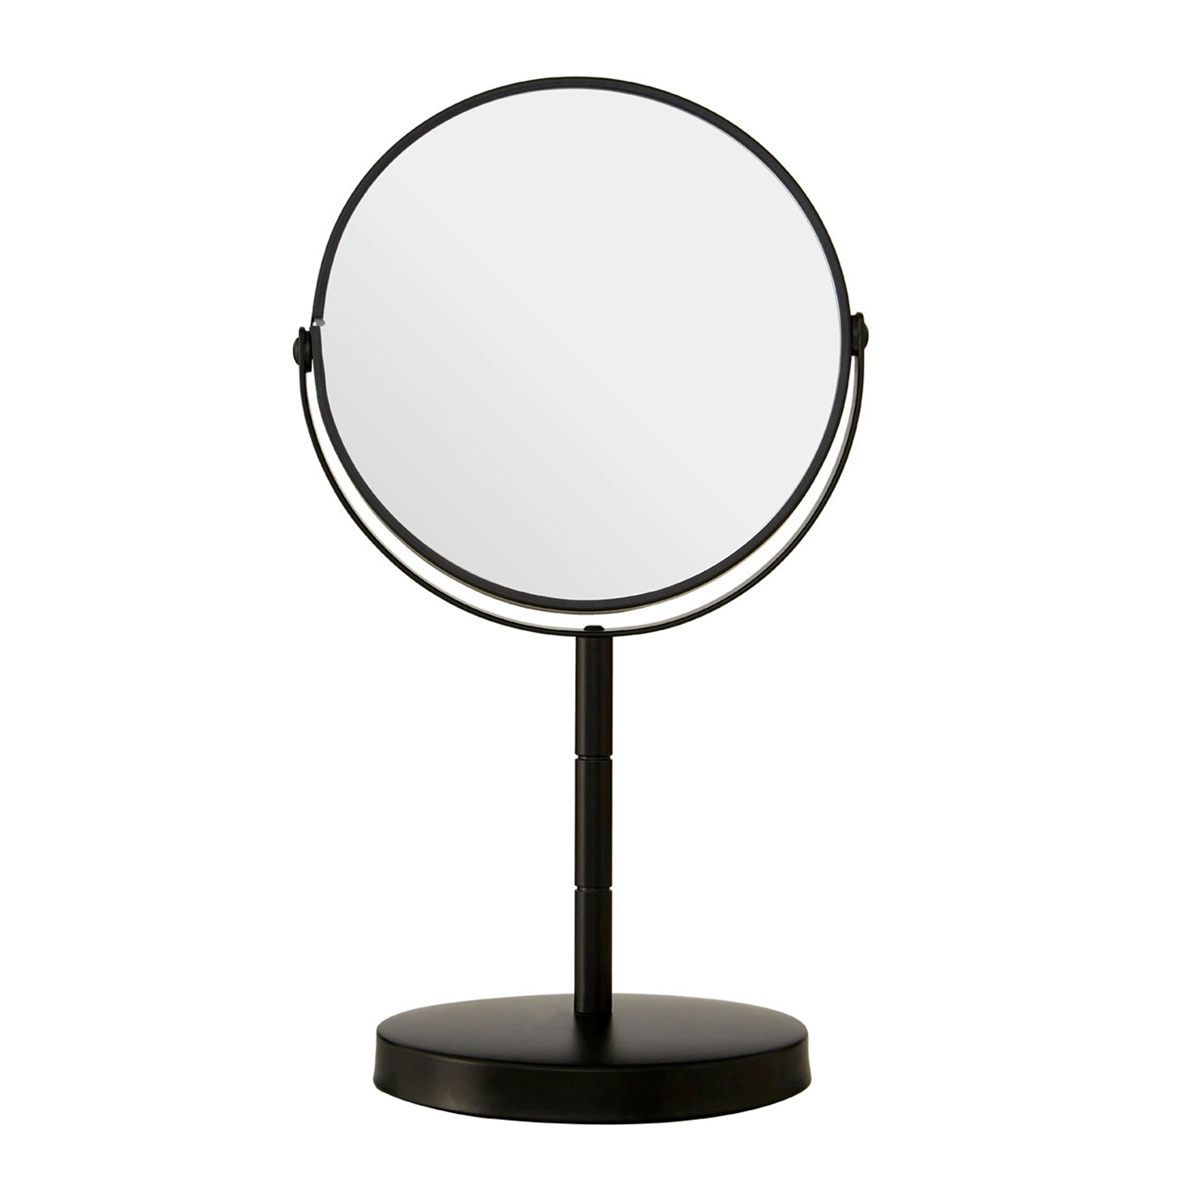 Accents Black small freestanding vanity mirror with 2x magnification